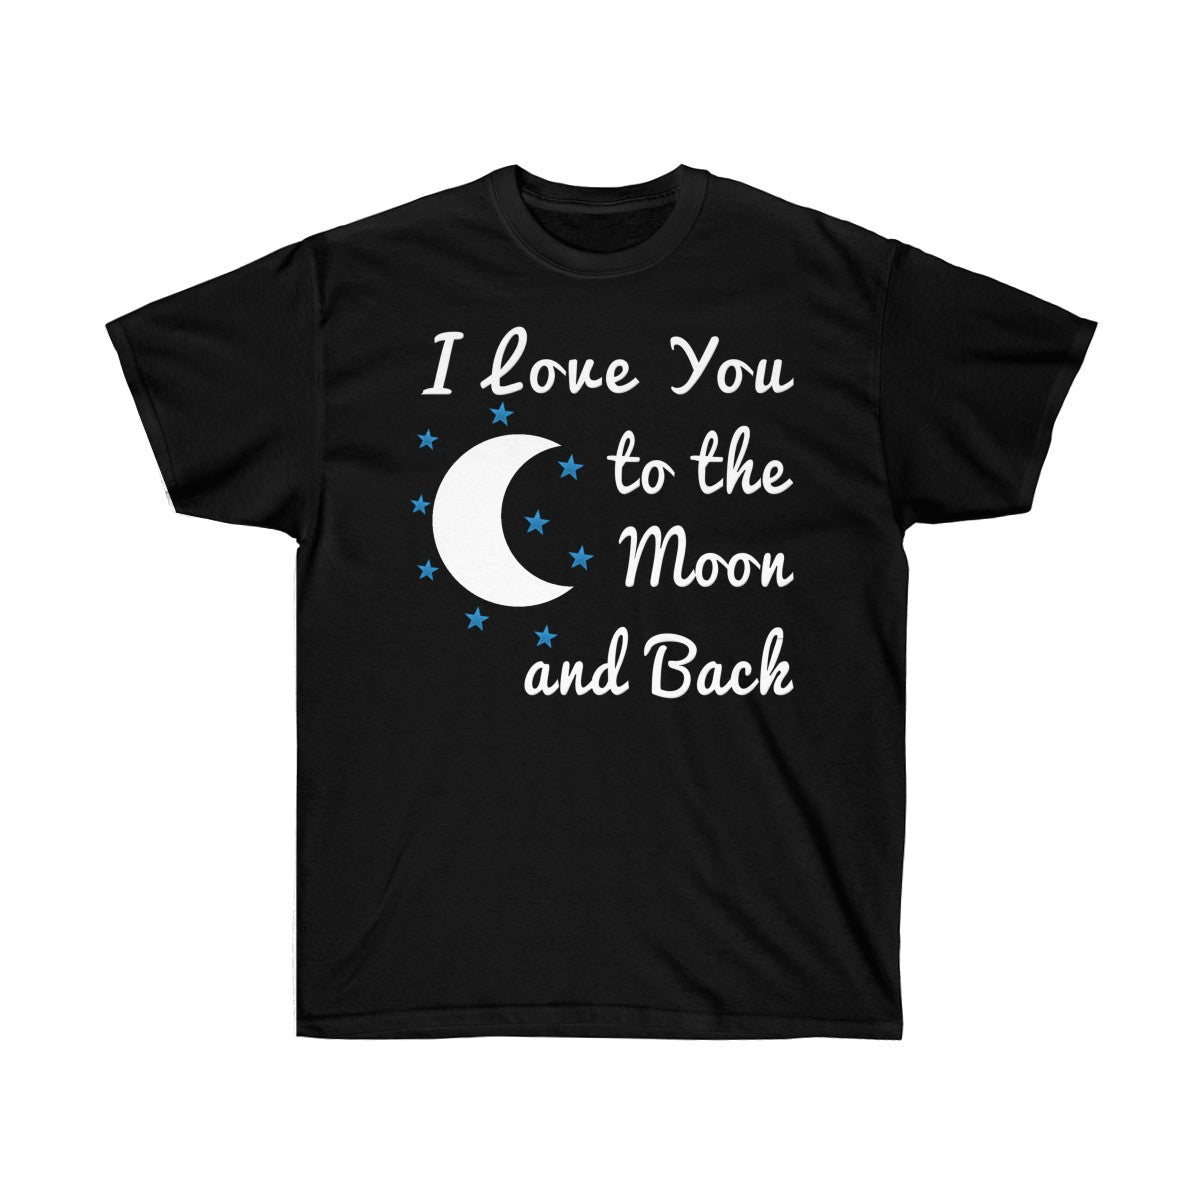 I Love You To The Moon & Back T-Shirt - Tees - Unisex Cotton T-Shirts